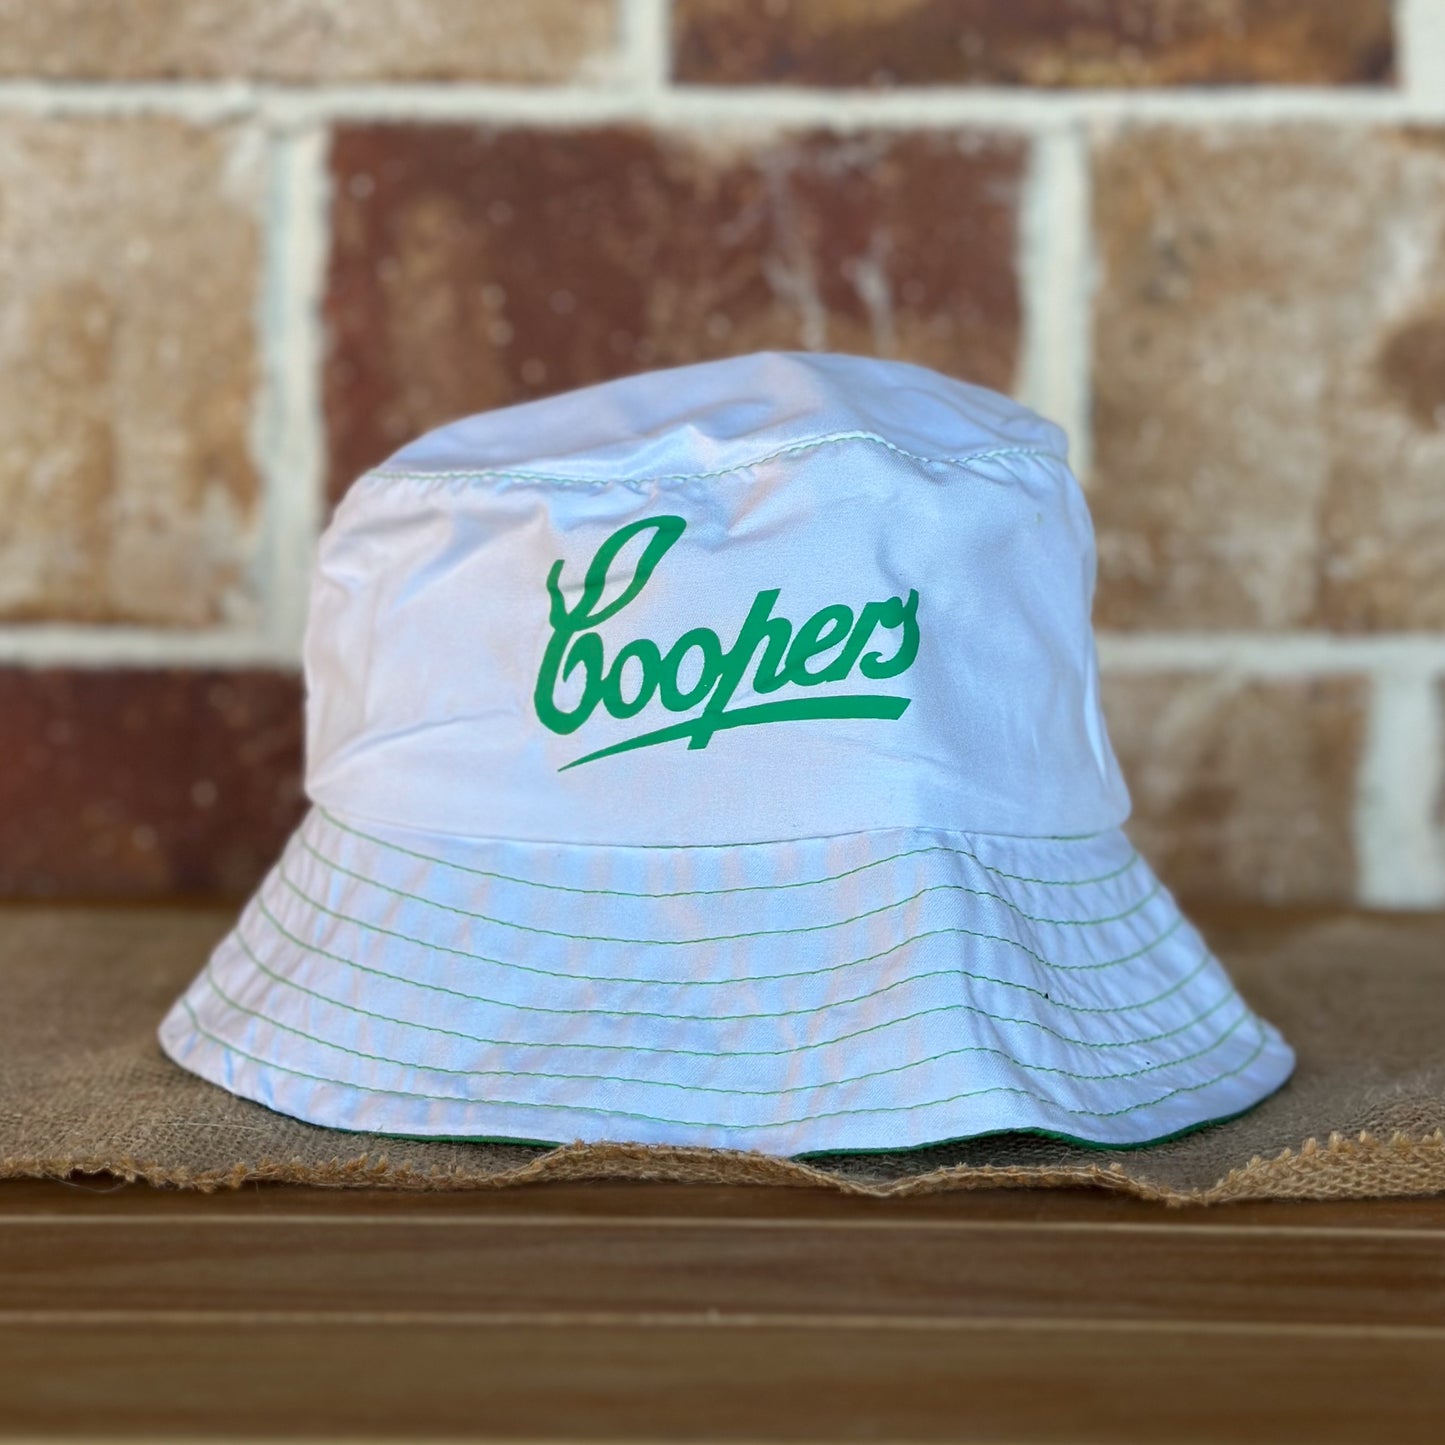 COOPERS Pale Ale Bucket Hat